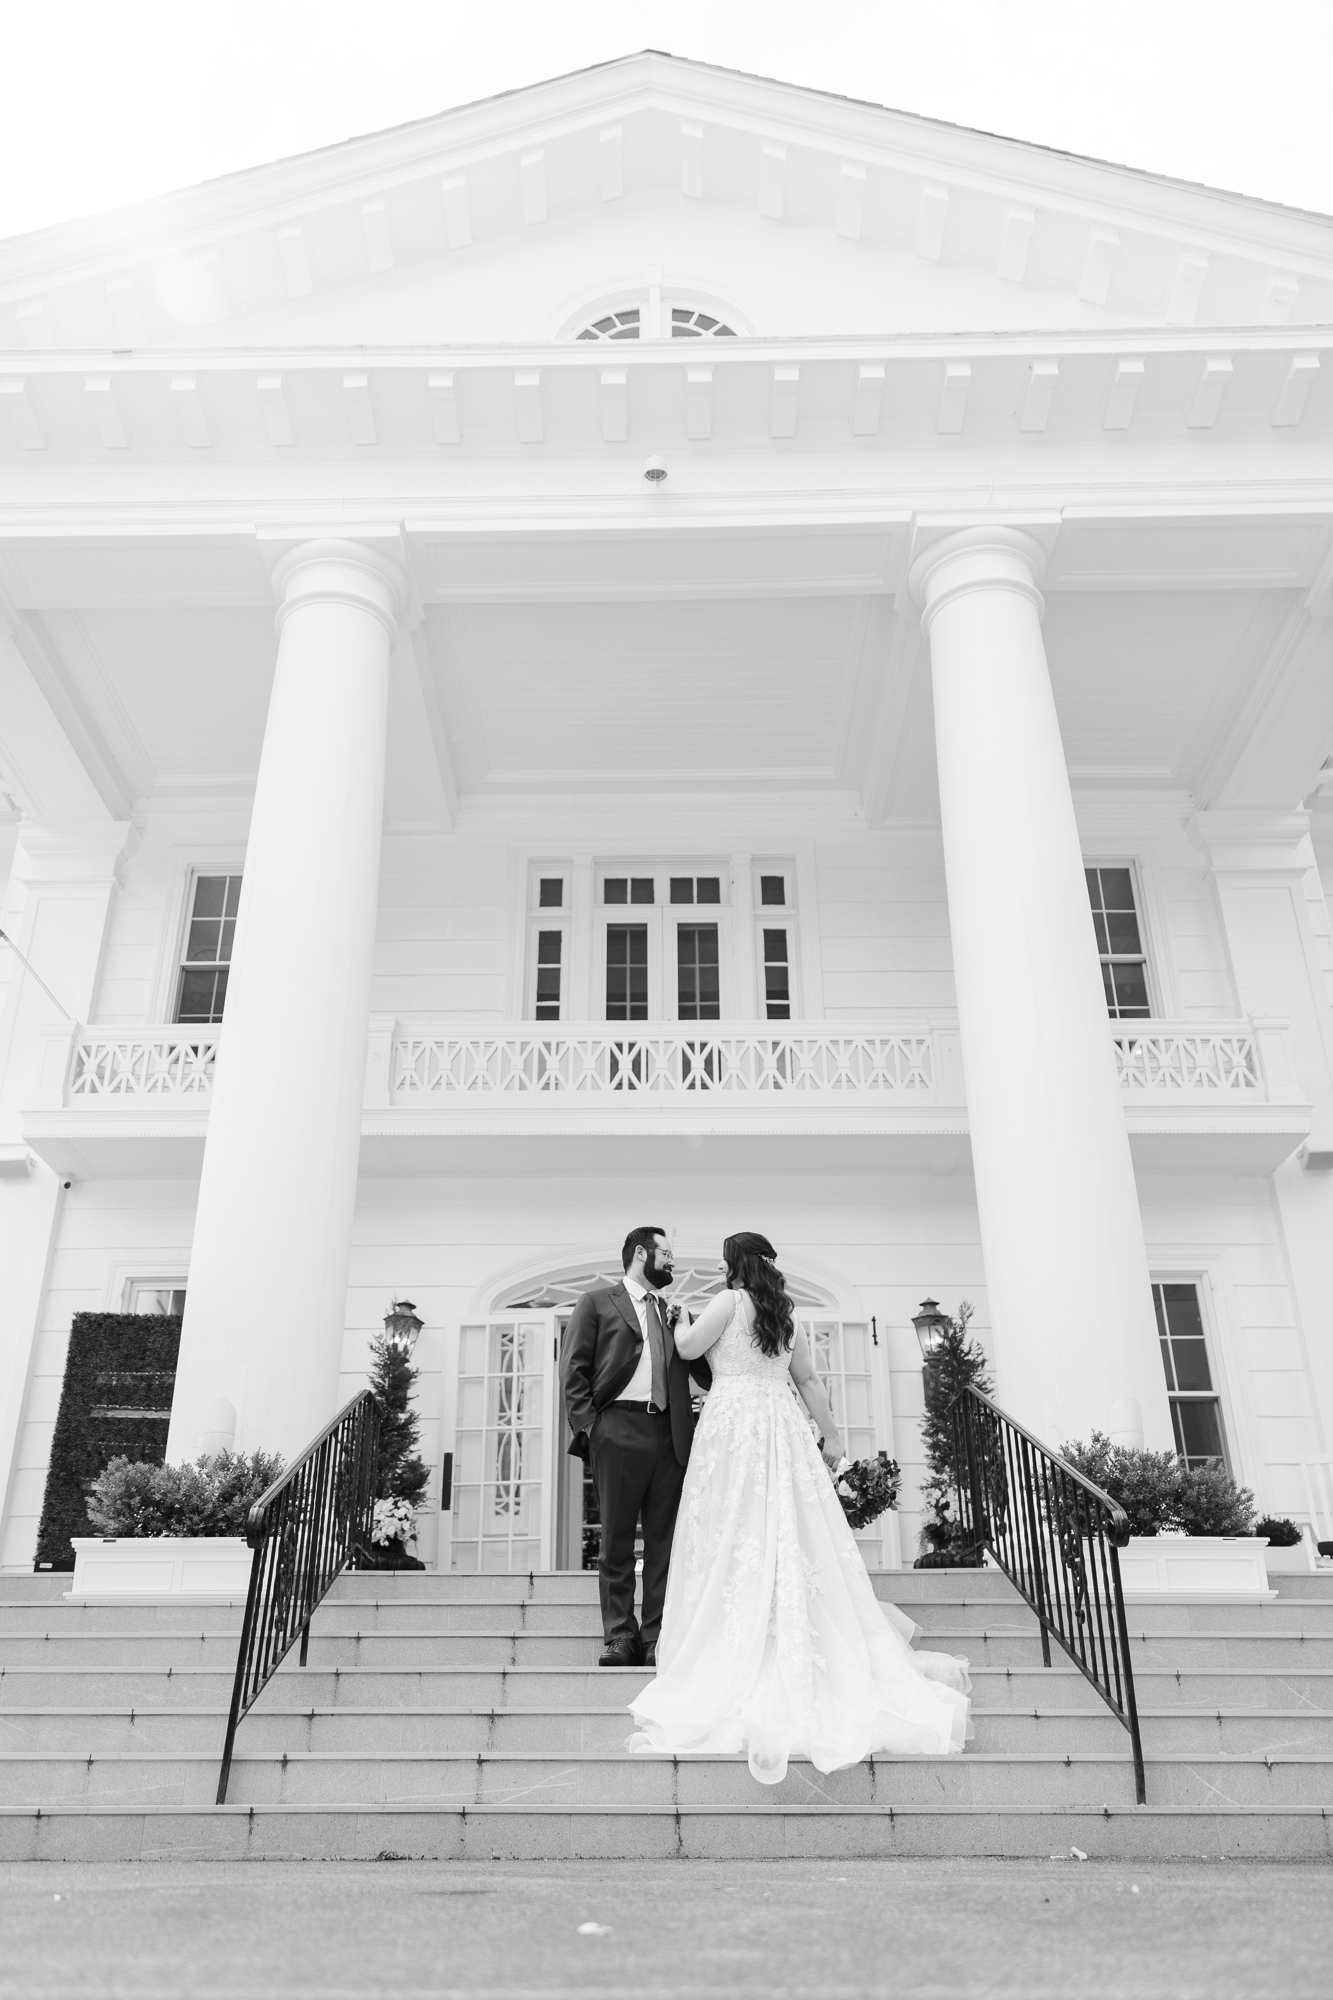 Candid Wedding at Briarcliff Manor in New York